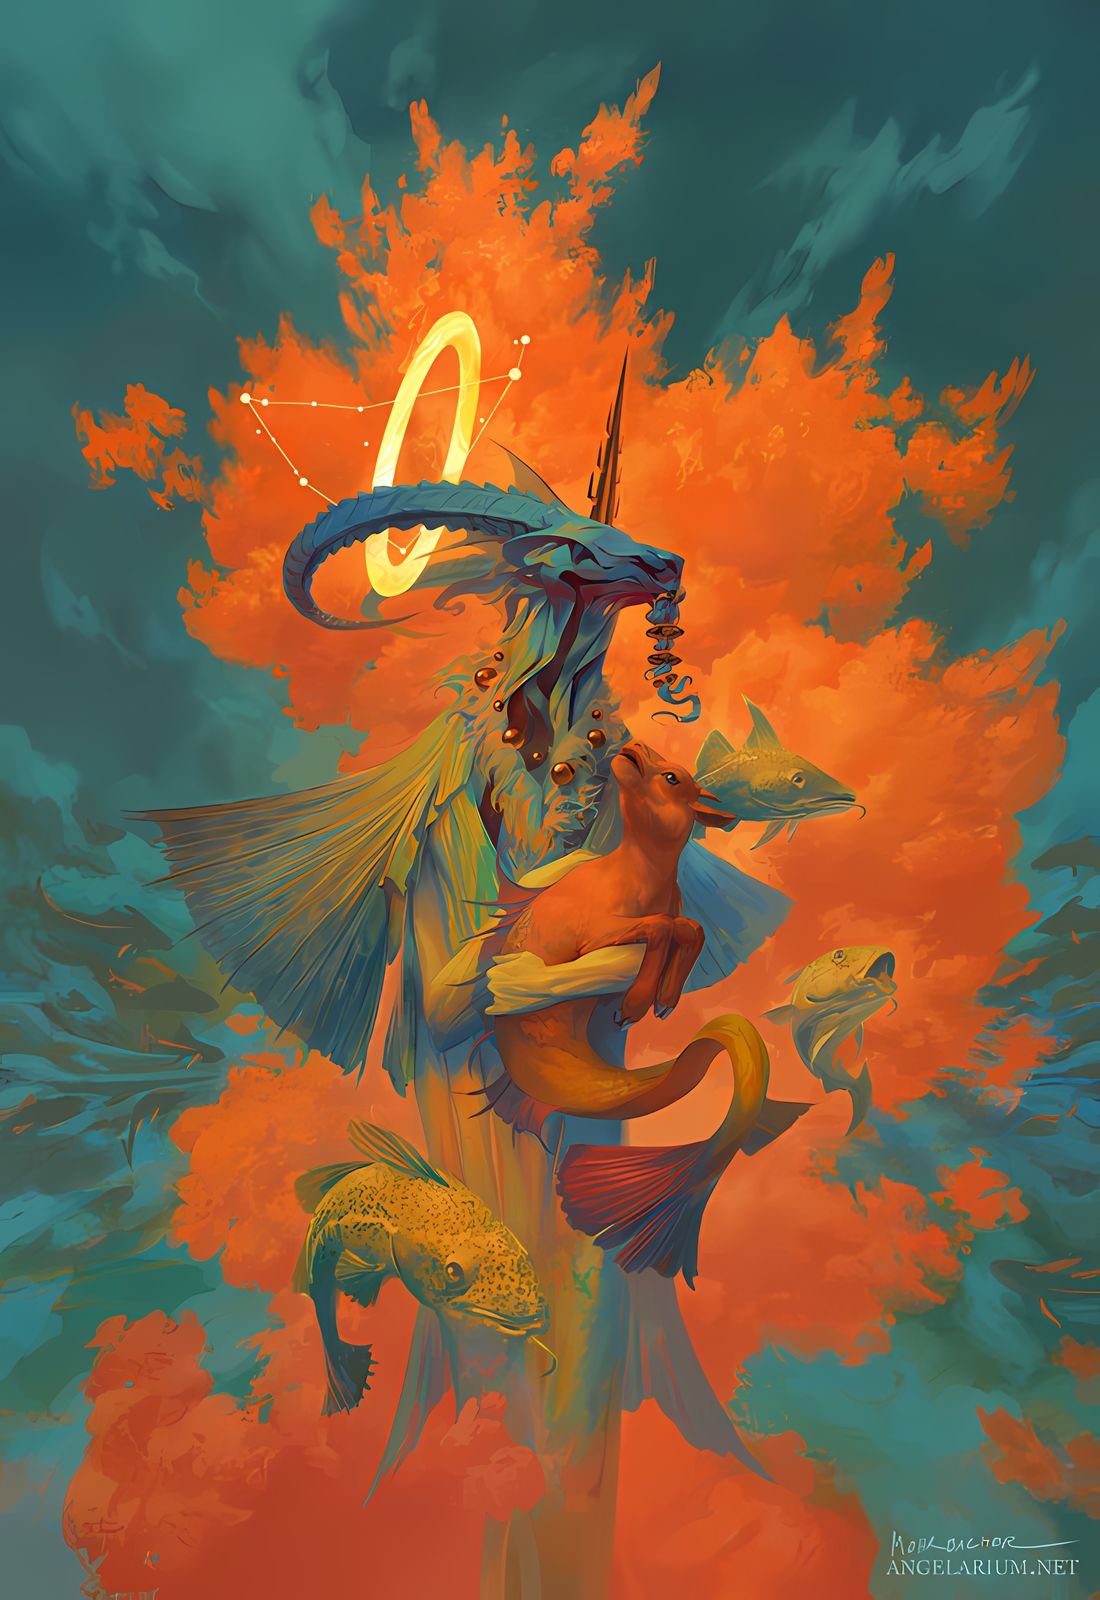 Peter Mohrbacher Blends Surrealism With Fantasy To Create Powerful Magical Beings (3)